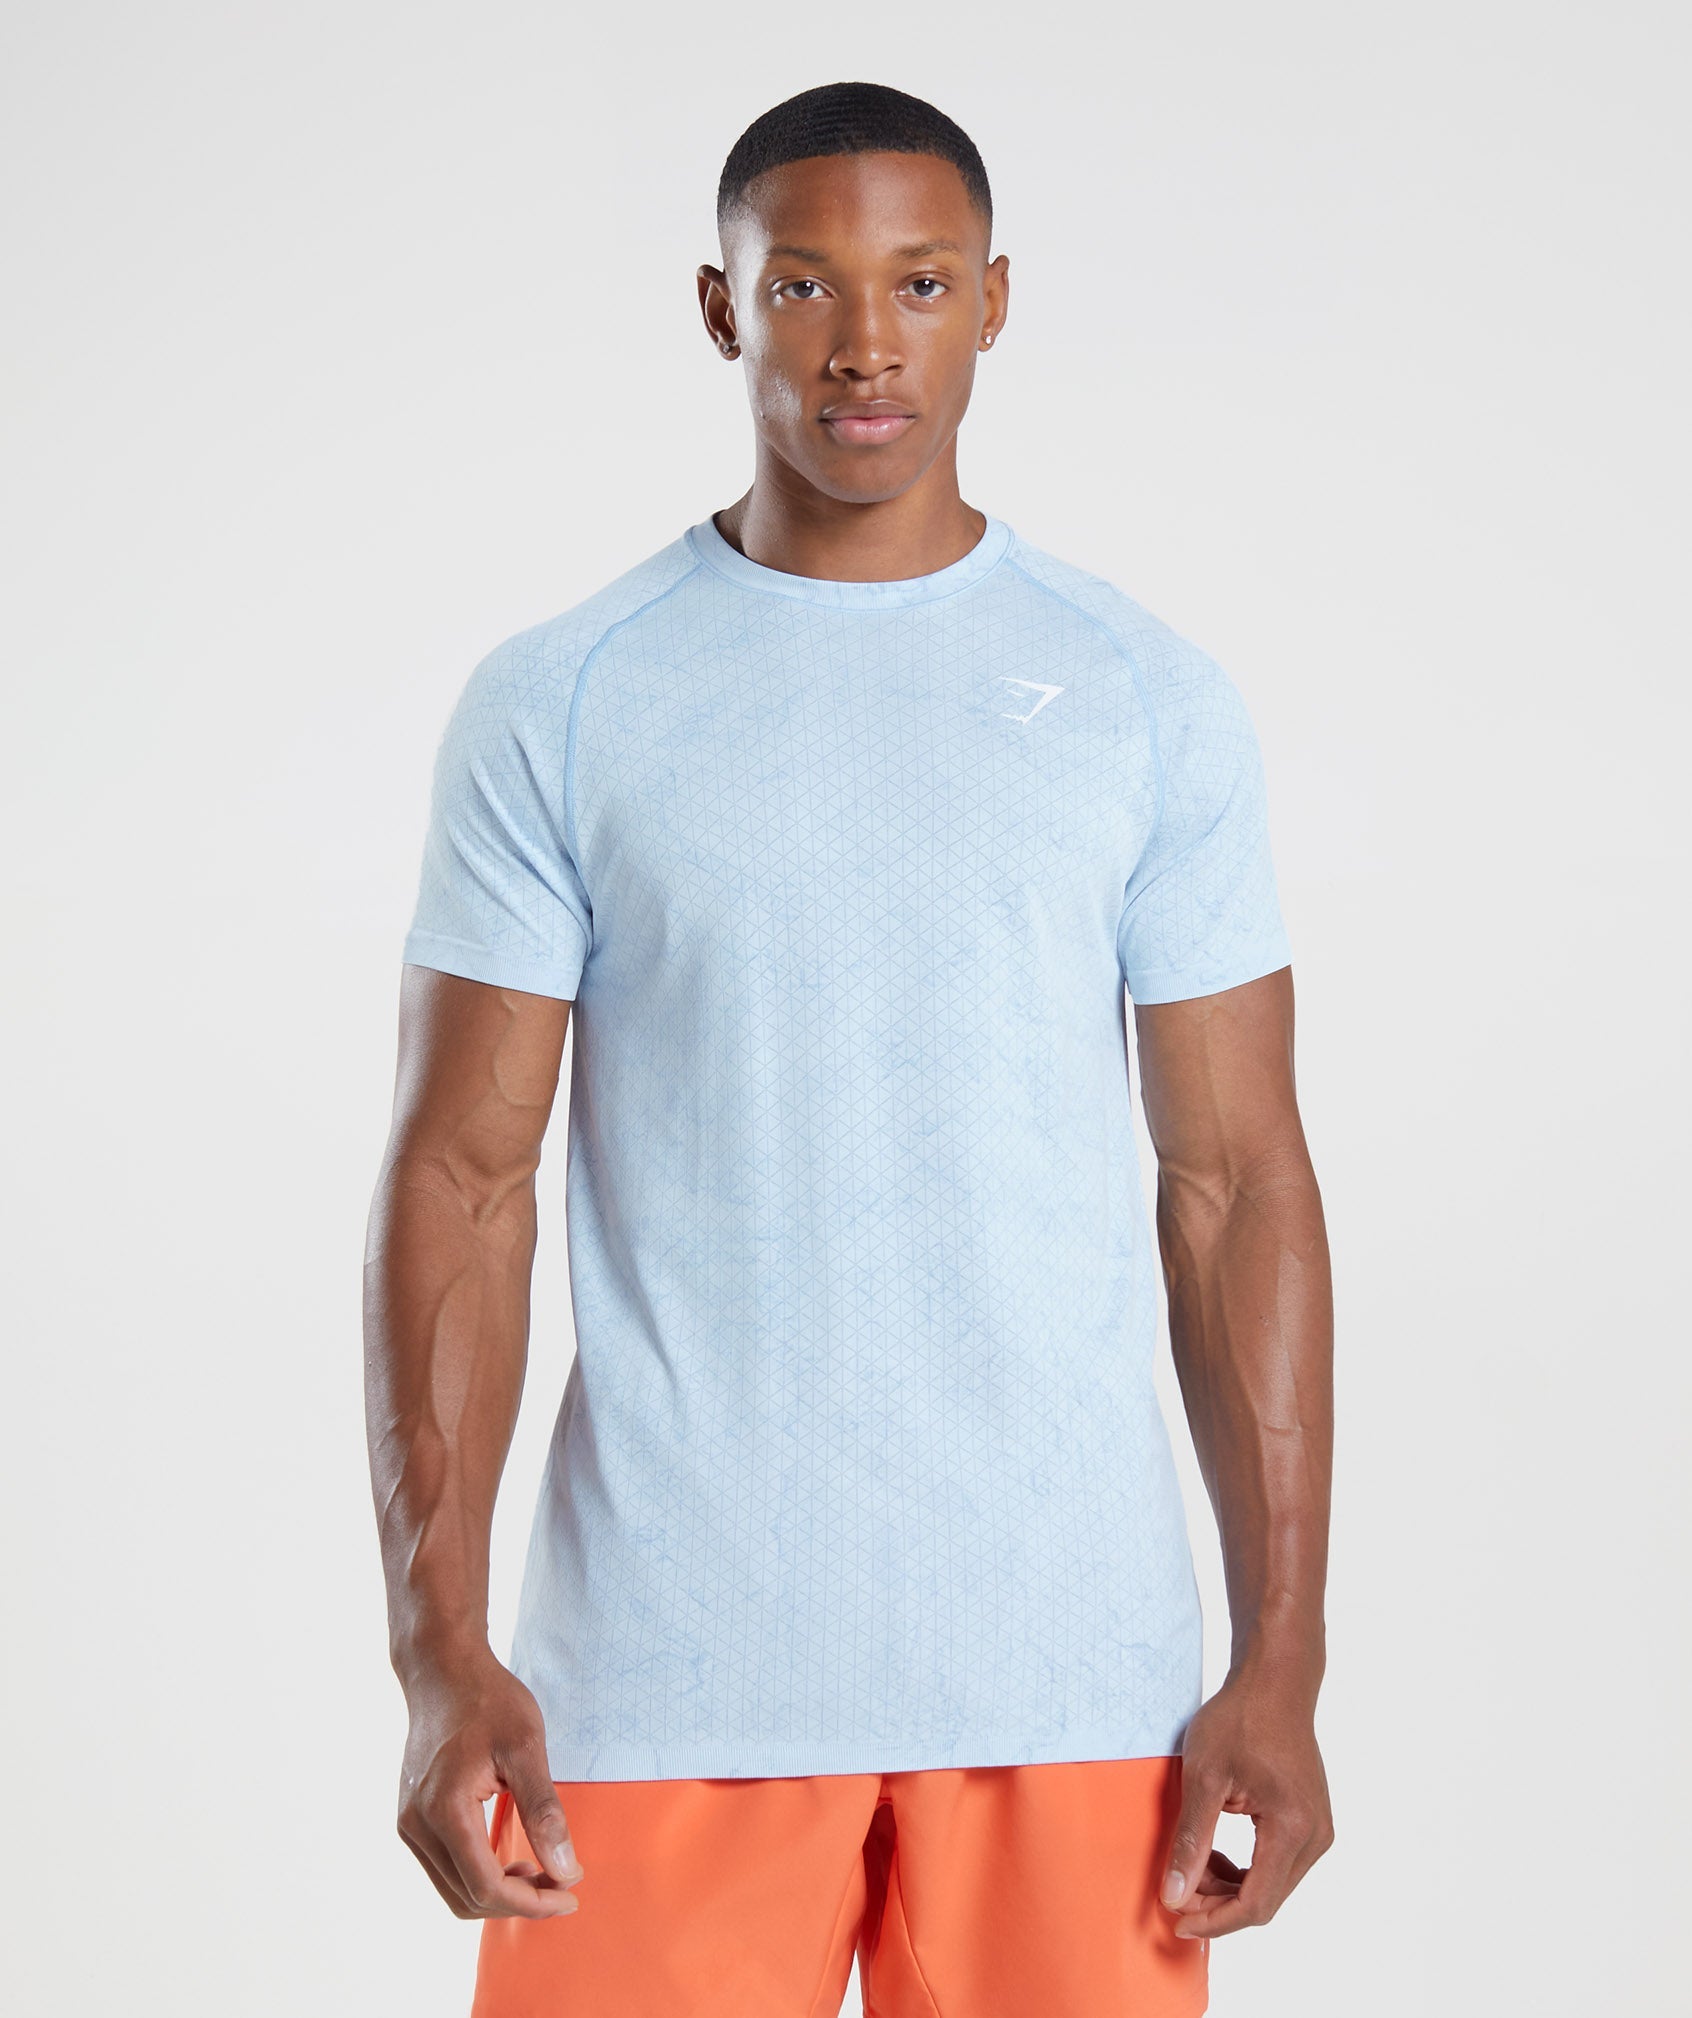 Geo Seamless T-Shirt in White/Moonstone Blue - view 1